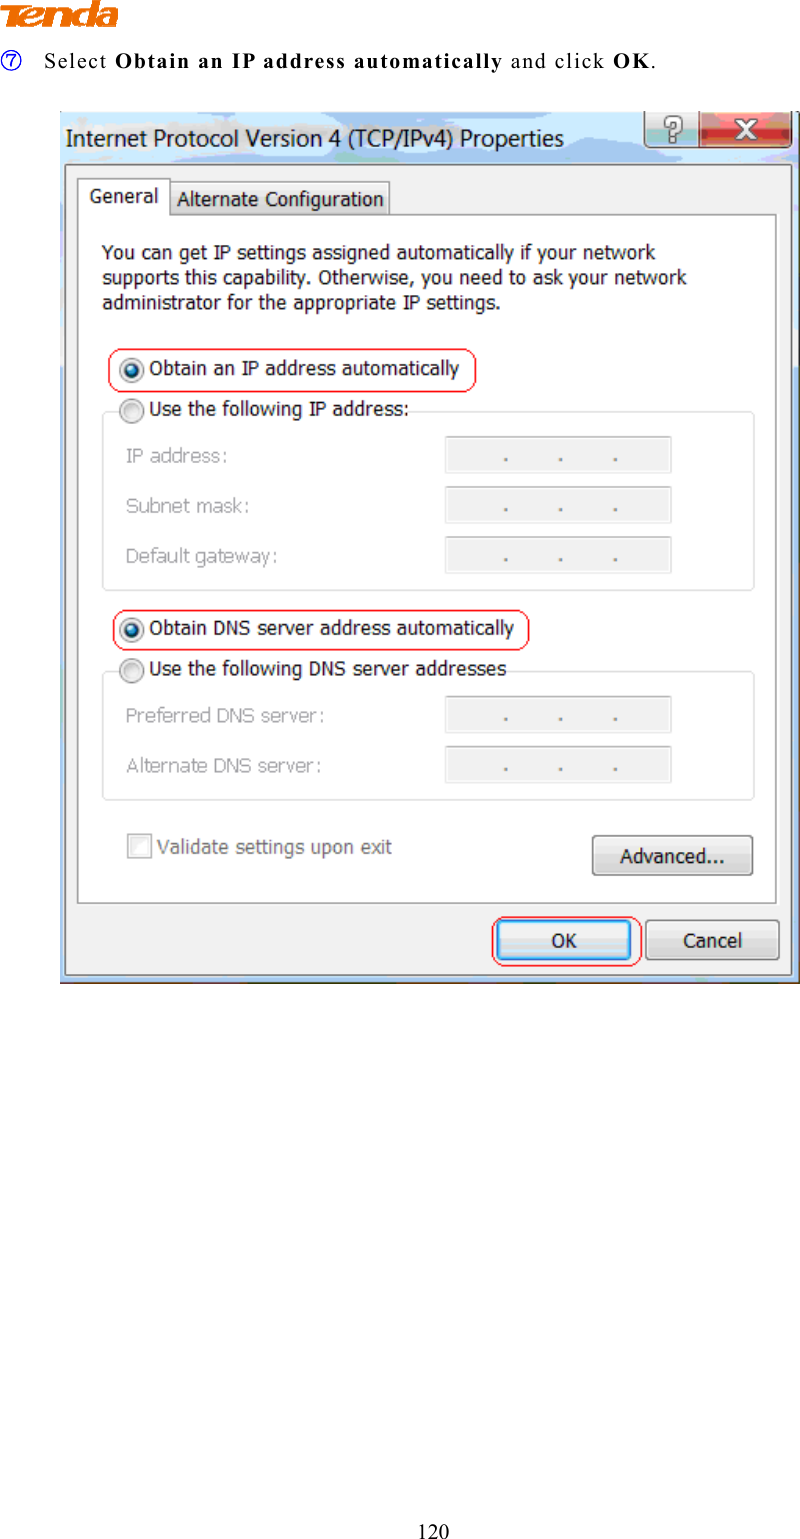                                        120 ⑦ Select Obtain an IP address automatically and click OK.     